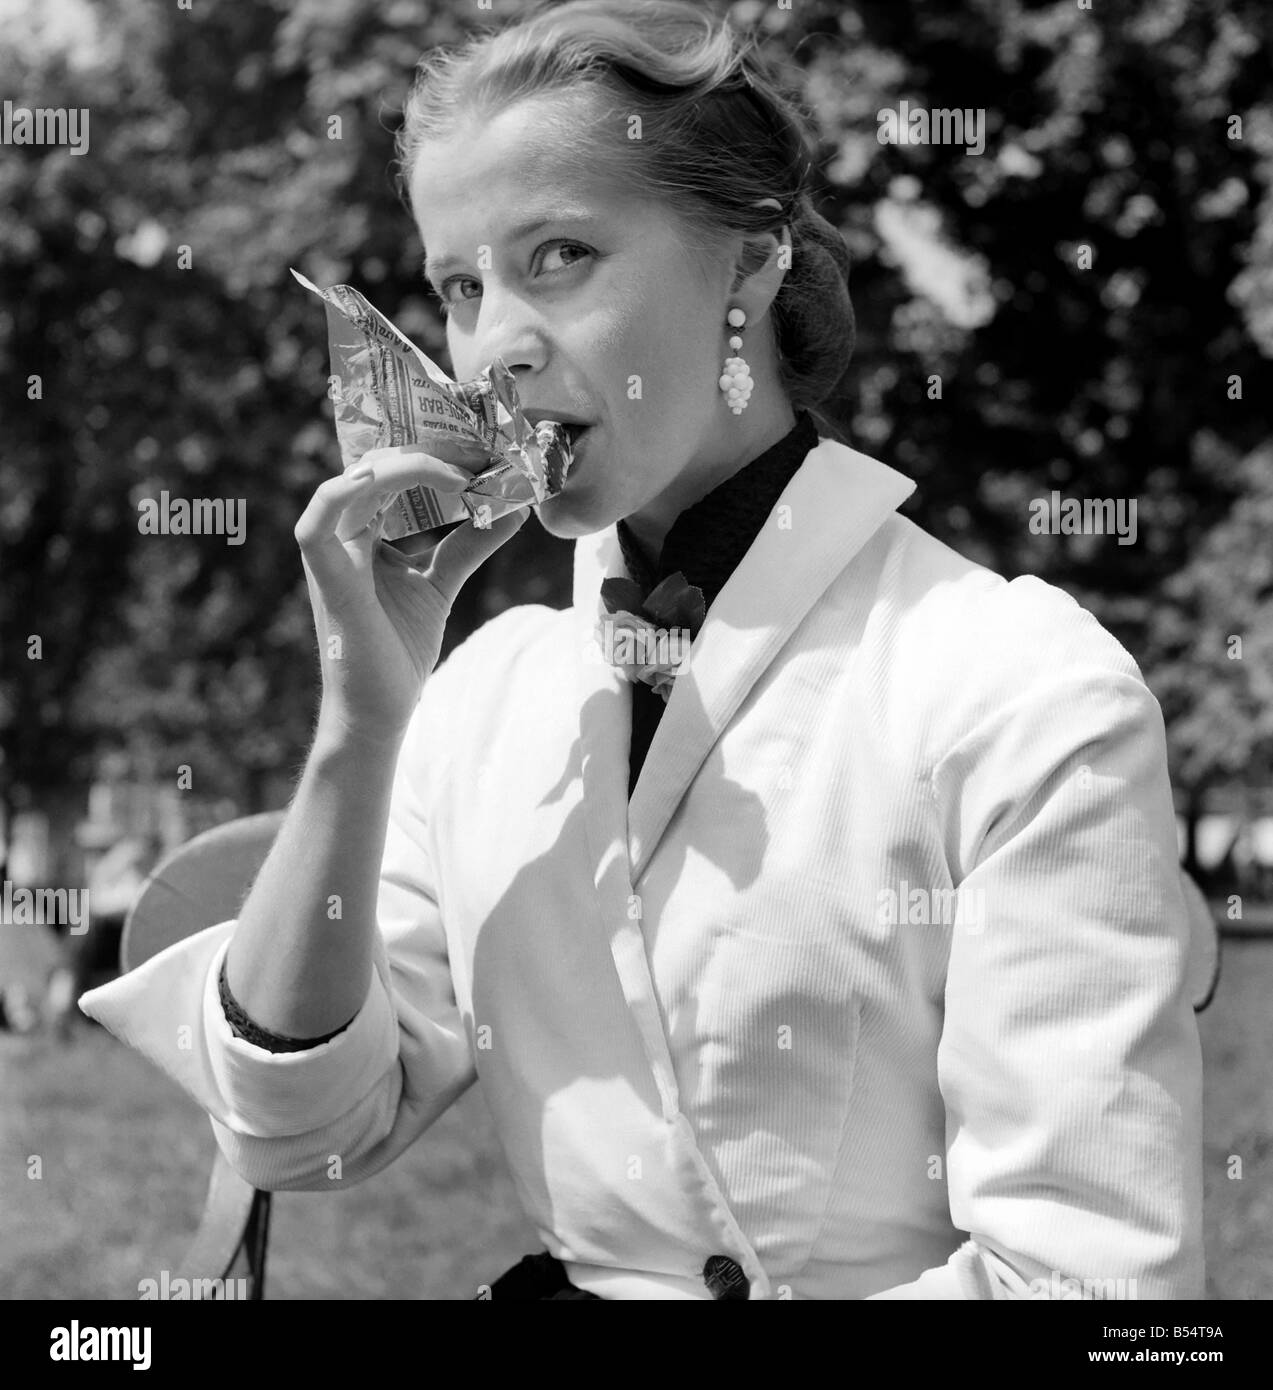 Eating for woman Black and White Stock Photos & Images - Alamy